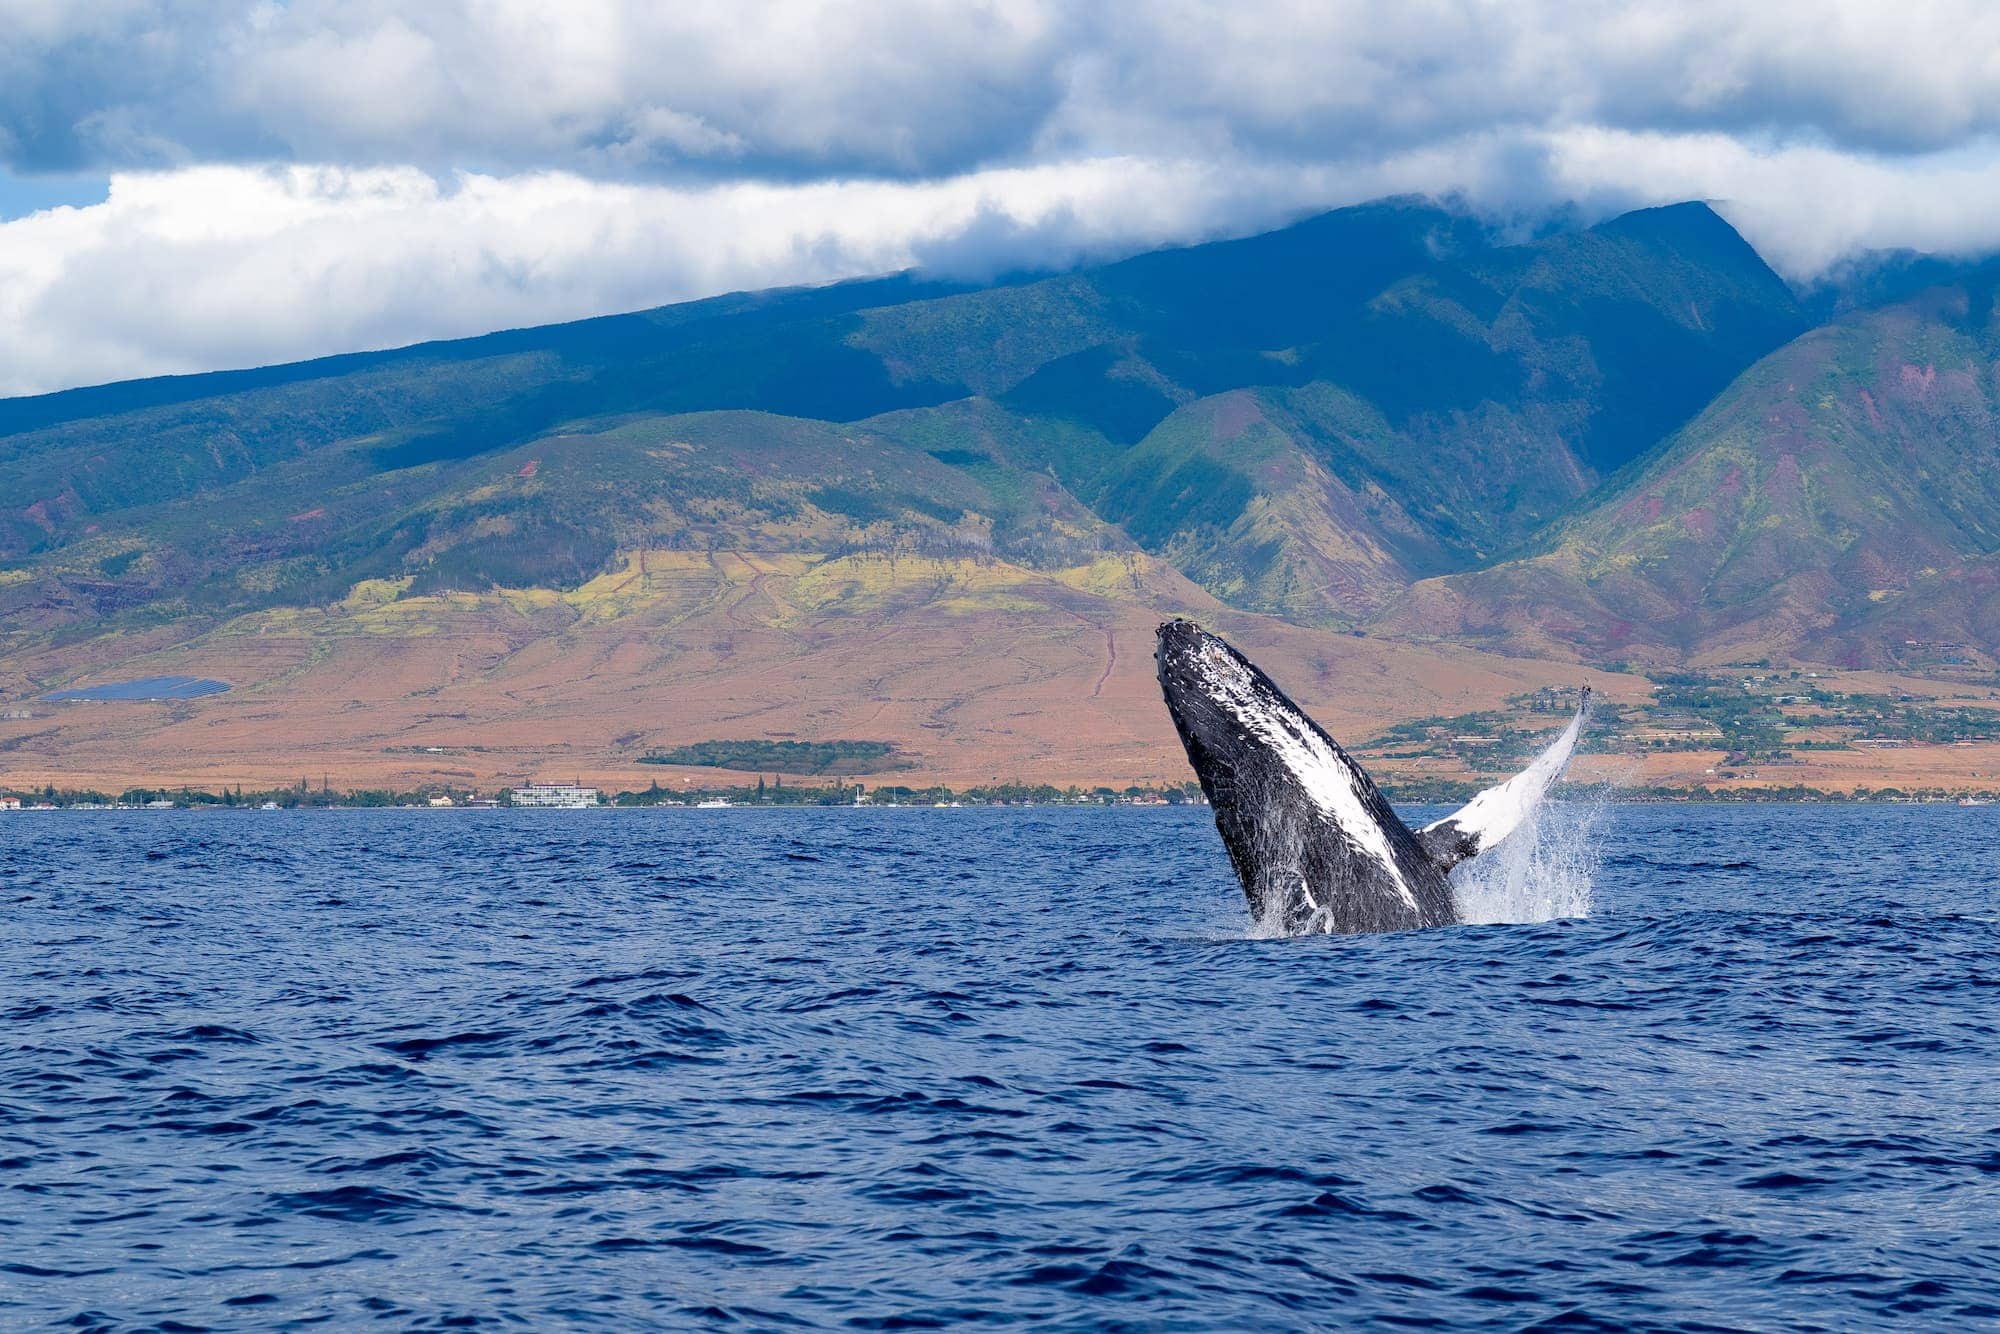 Maui Whale Watching for Visitors (Best Tours, FAQ, and DIY Tips)